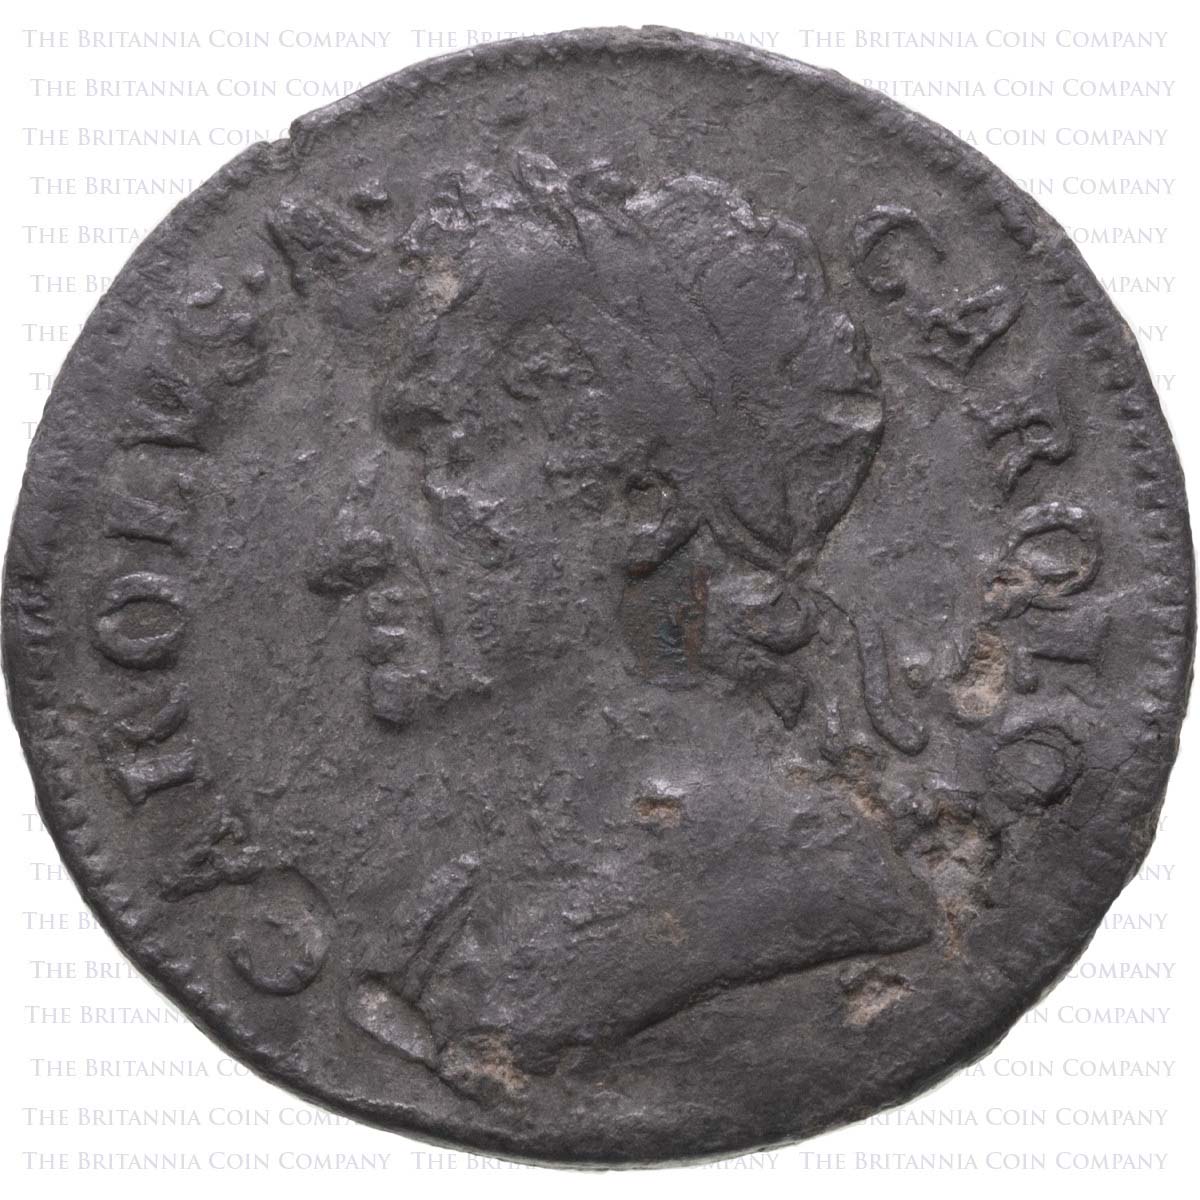 1684 King Charles II Tin Issue Farthing Coin Oberse